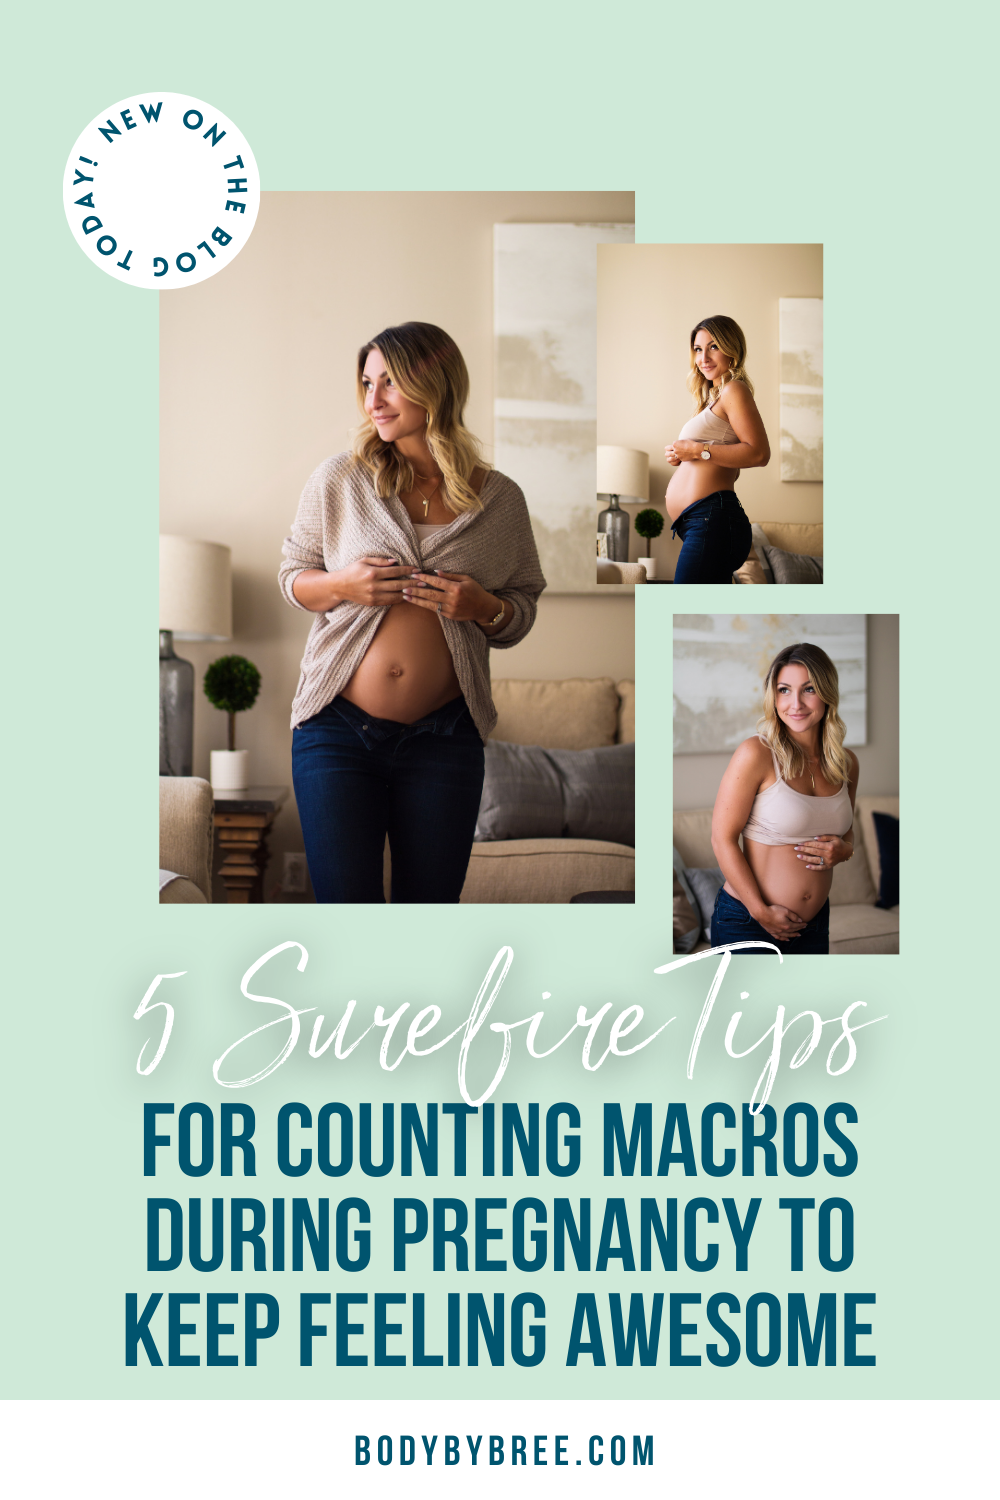 5 SURE FIRE TIP'S FOR COUNTING MACROS DURING PREGNANCY TO KEEP FEELING AWESEOME